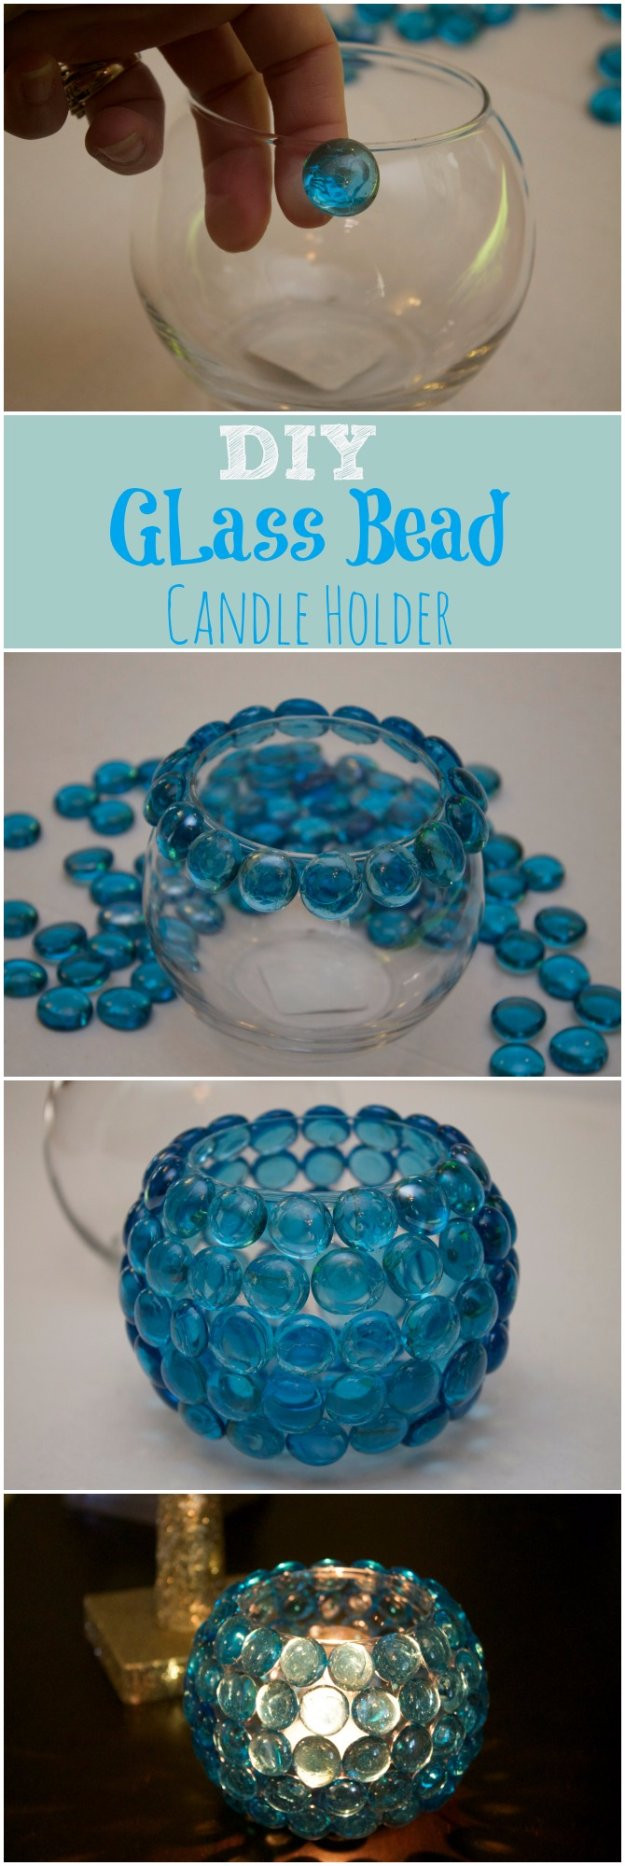 Cool Crafts For Adults
 50 Easy Crafts to Make and Sell